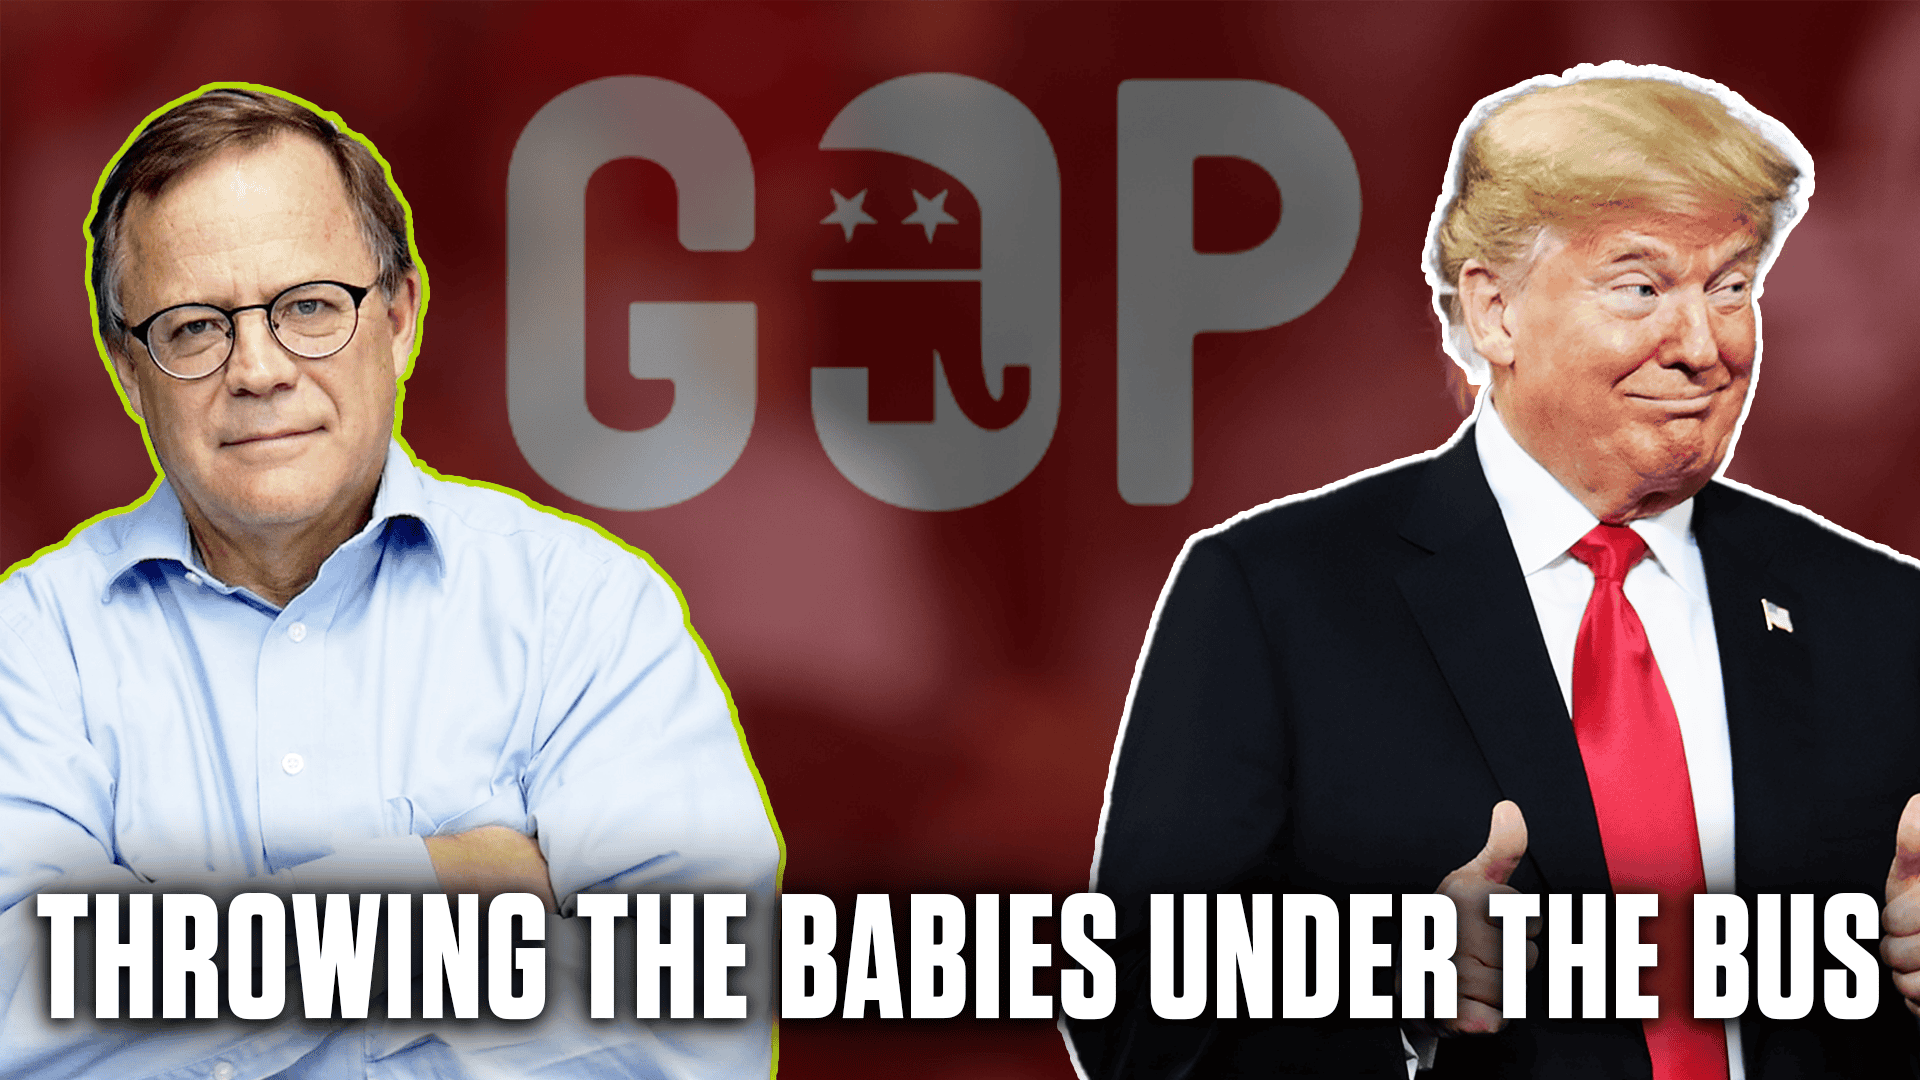 The Caving of the GOP: What Now?